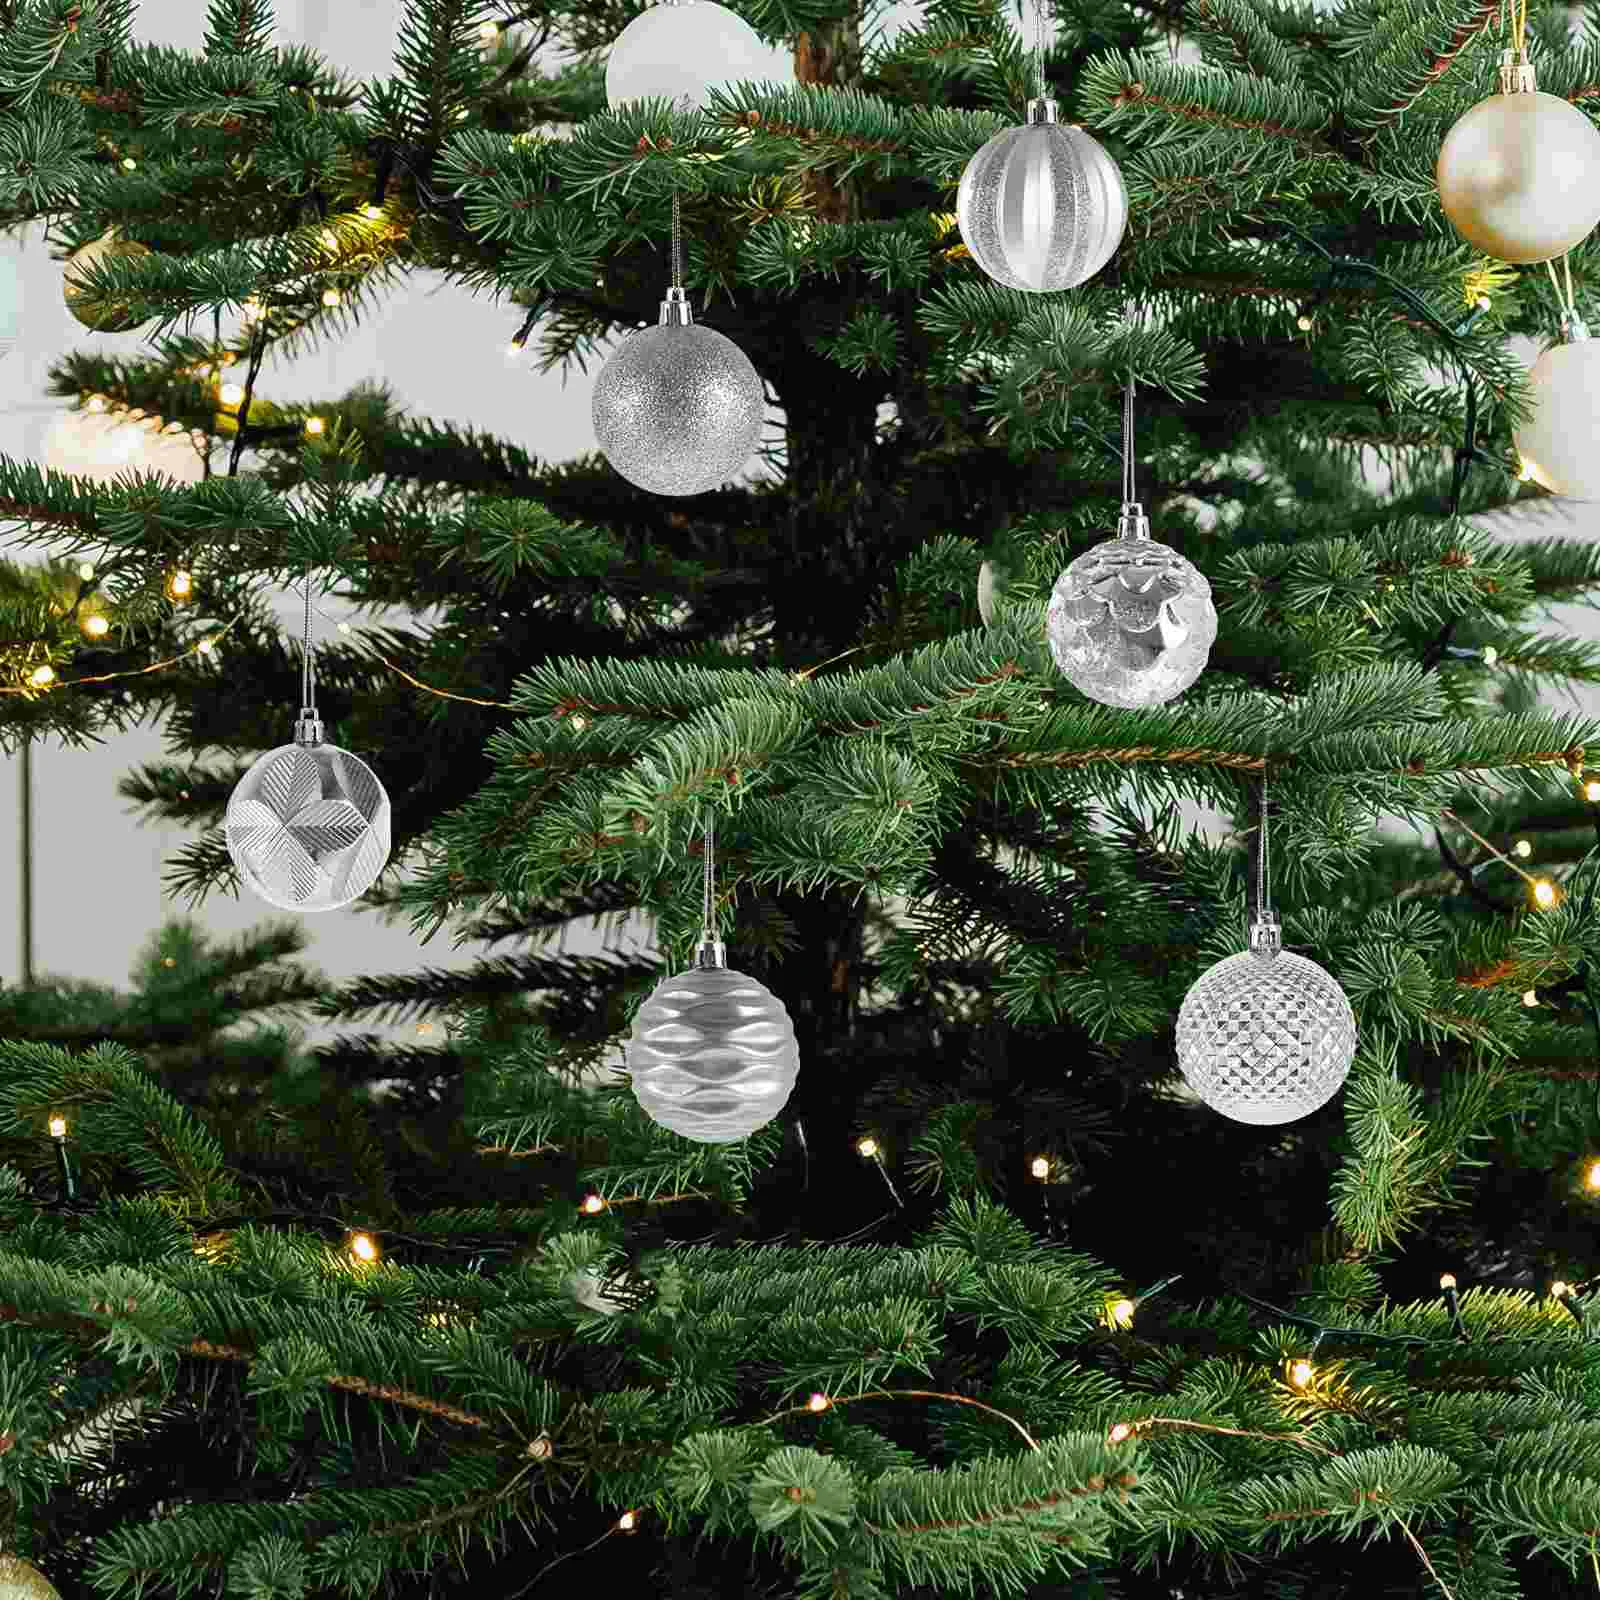 

12Pcs Christmas Ball Ornaments Xmas Tree Shatterproof Baubles with Hanging Loop for Holiday